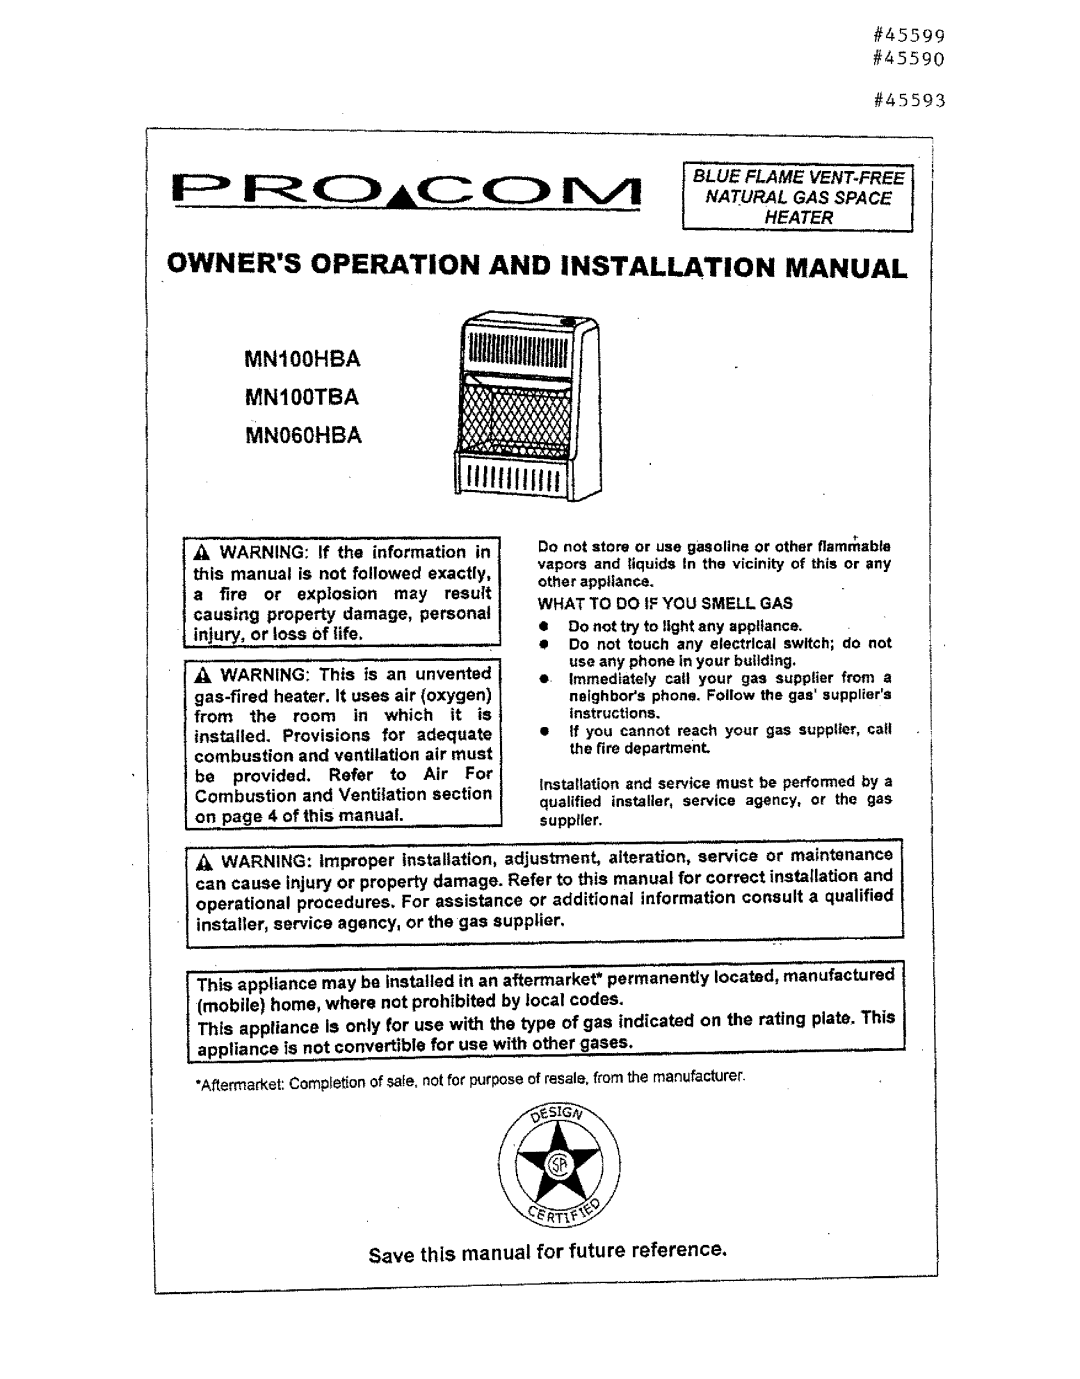 Procom installation manual MN060HBA MN100HBA MN100TBA Table of Contents, Owner’S Operation And Installation Manual 